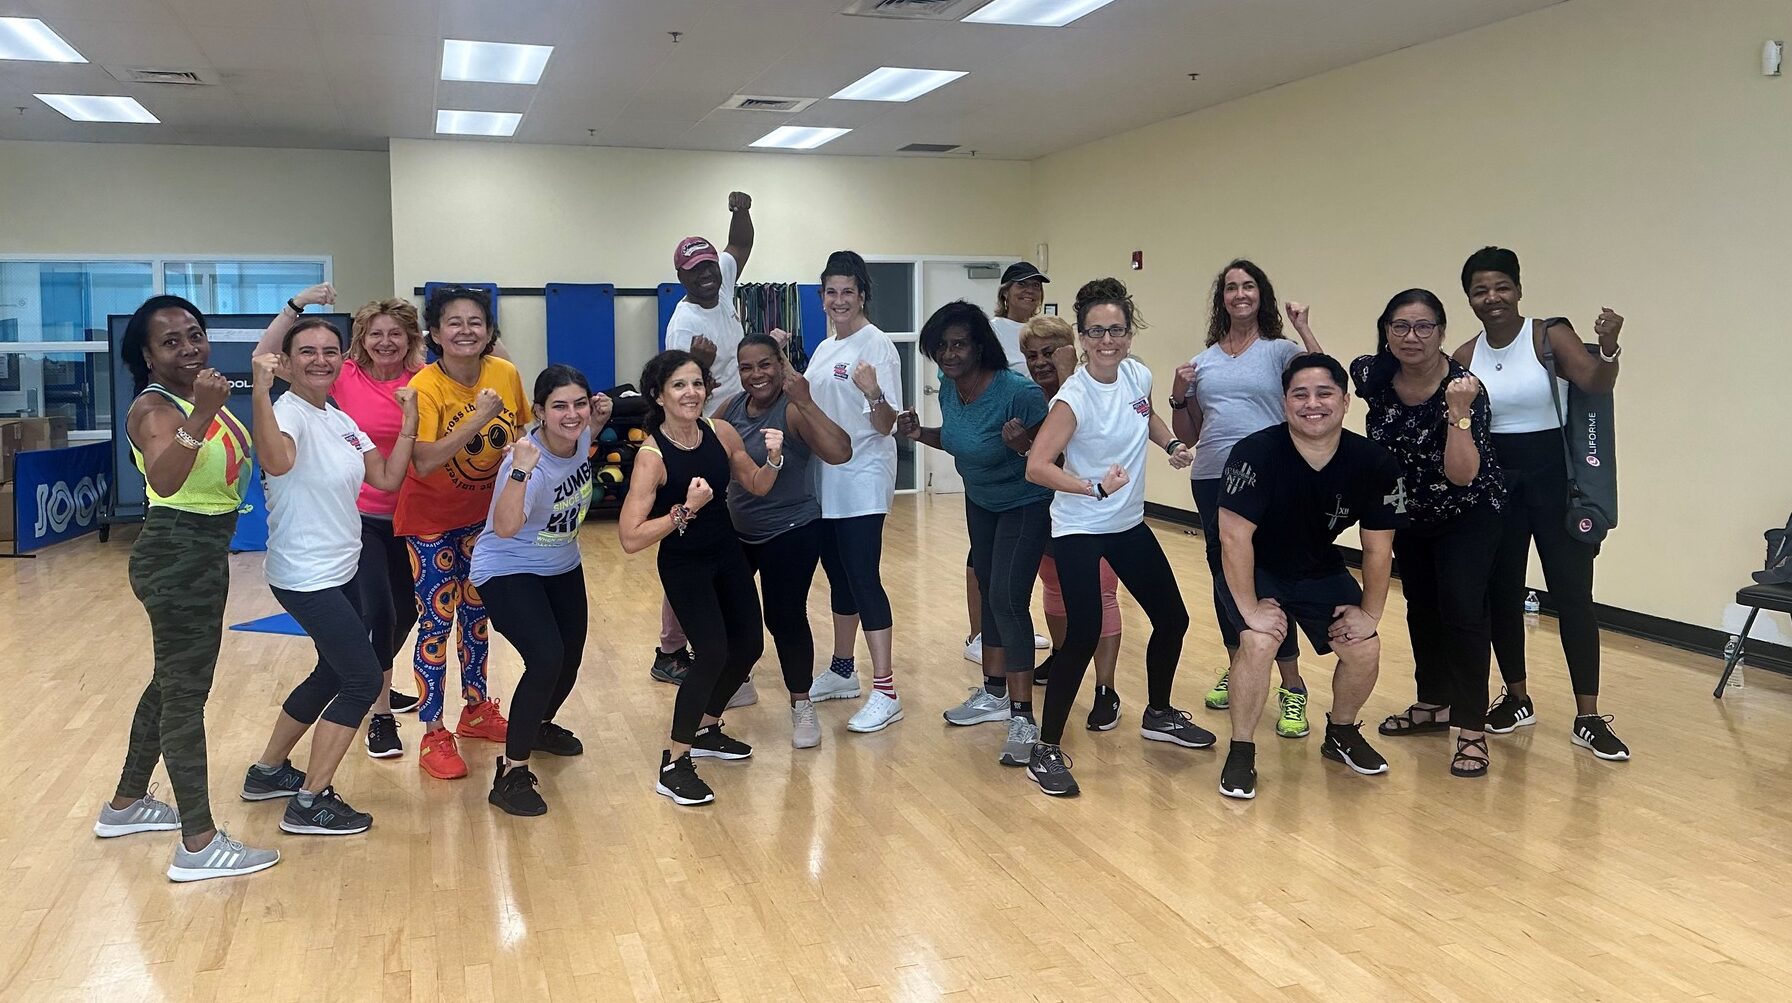 Get Your Groove On: Tamarac Residents Invited to Free Jazzercise Class as Part of Move with the Mayor Program